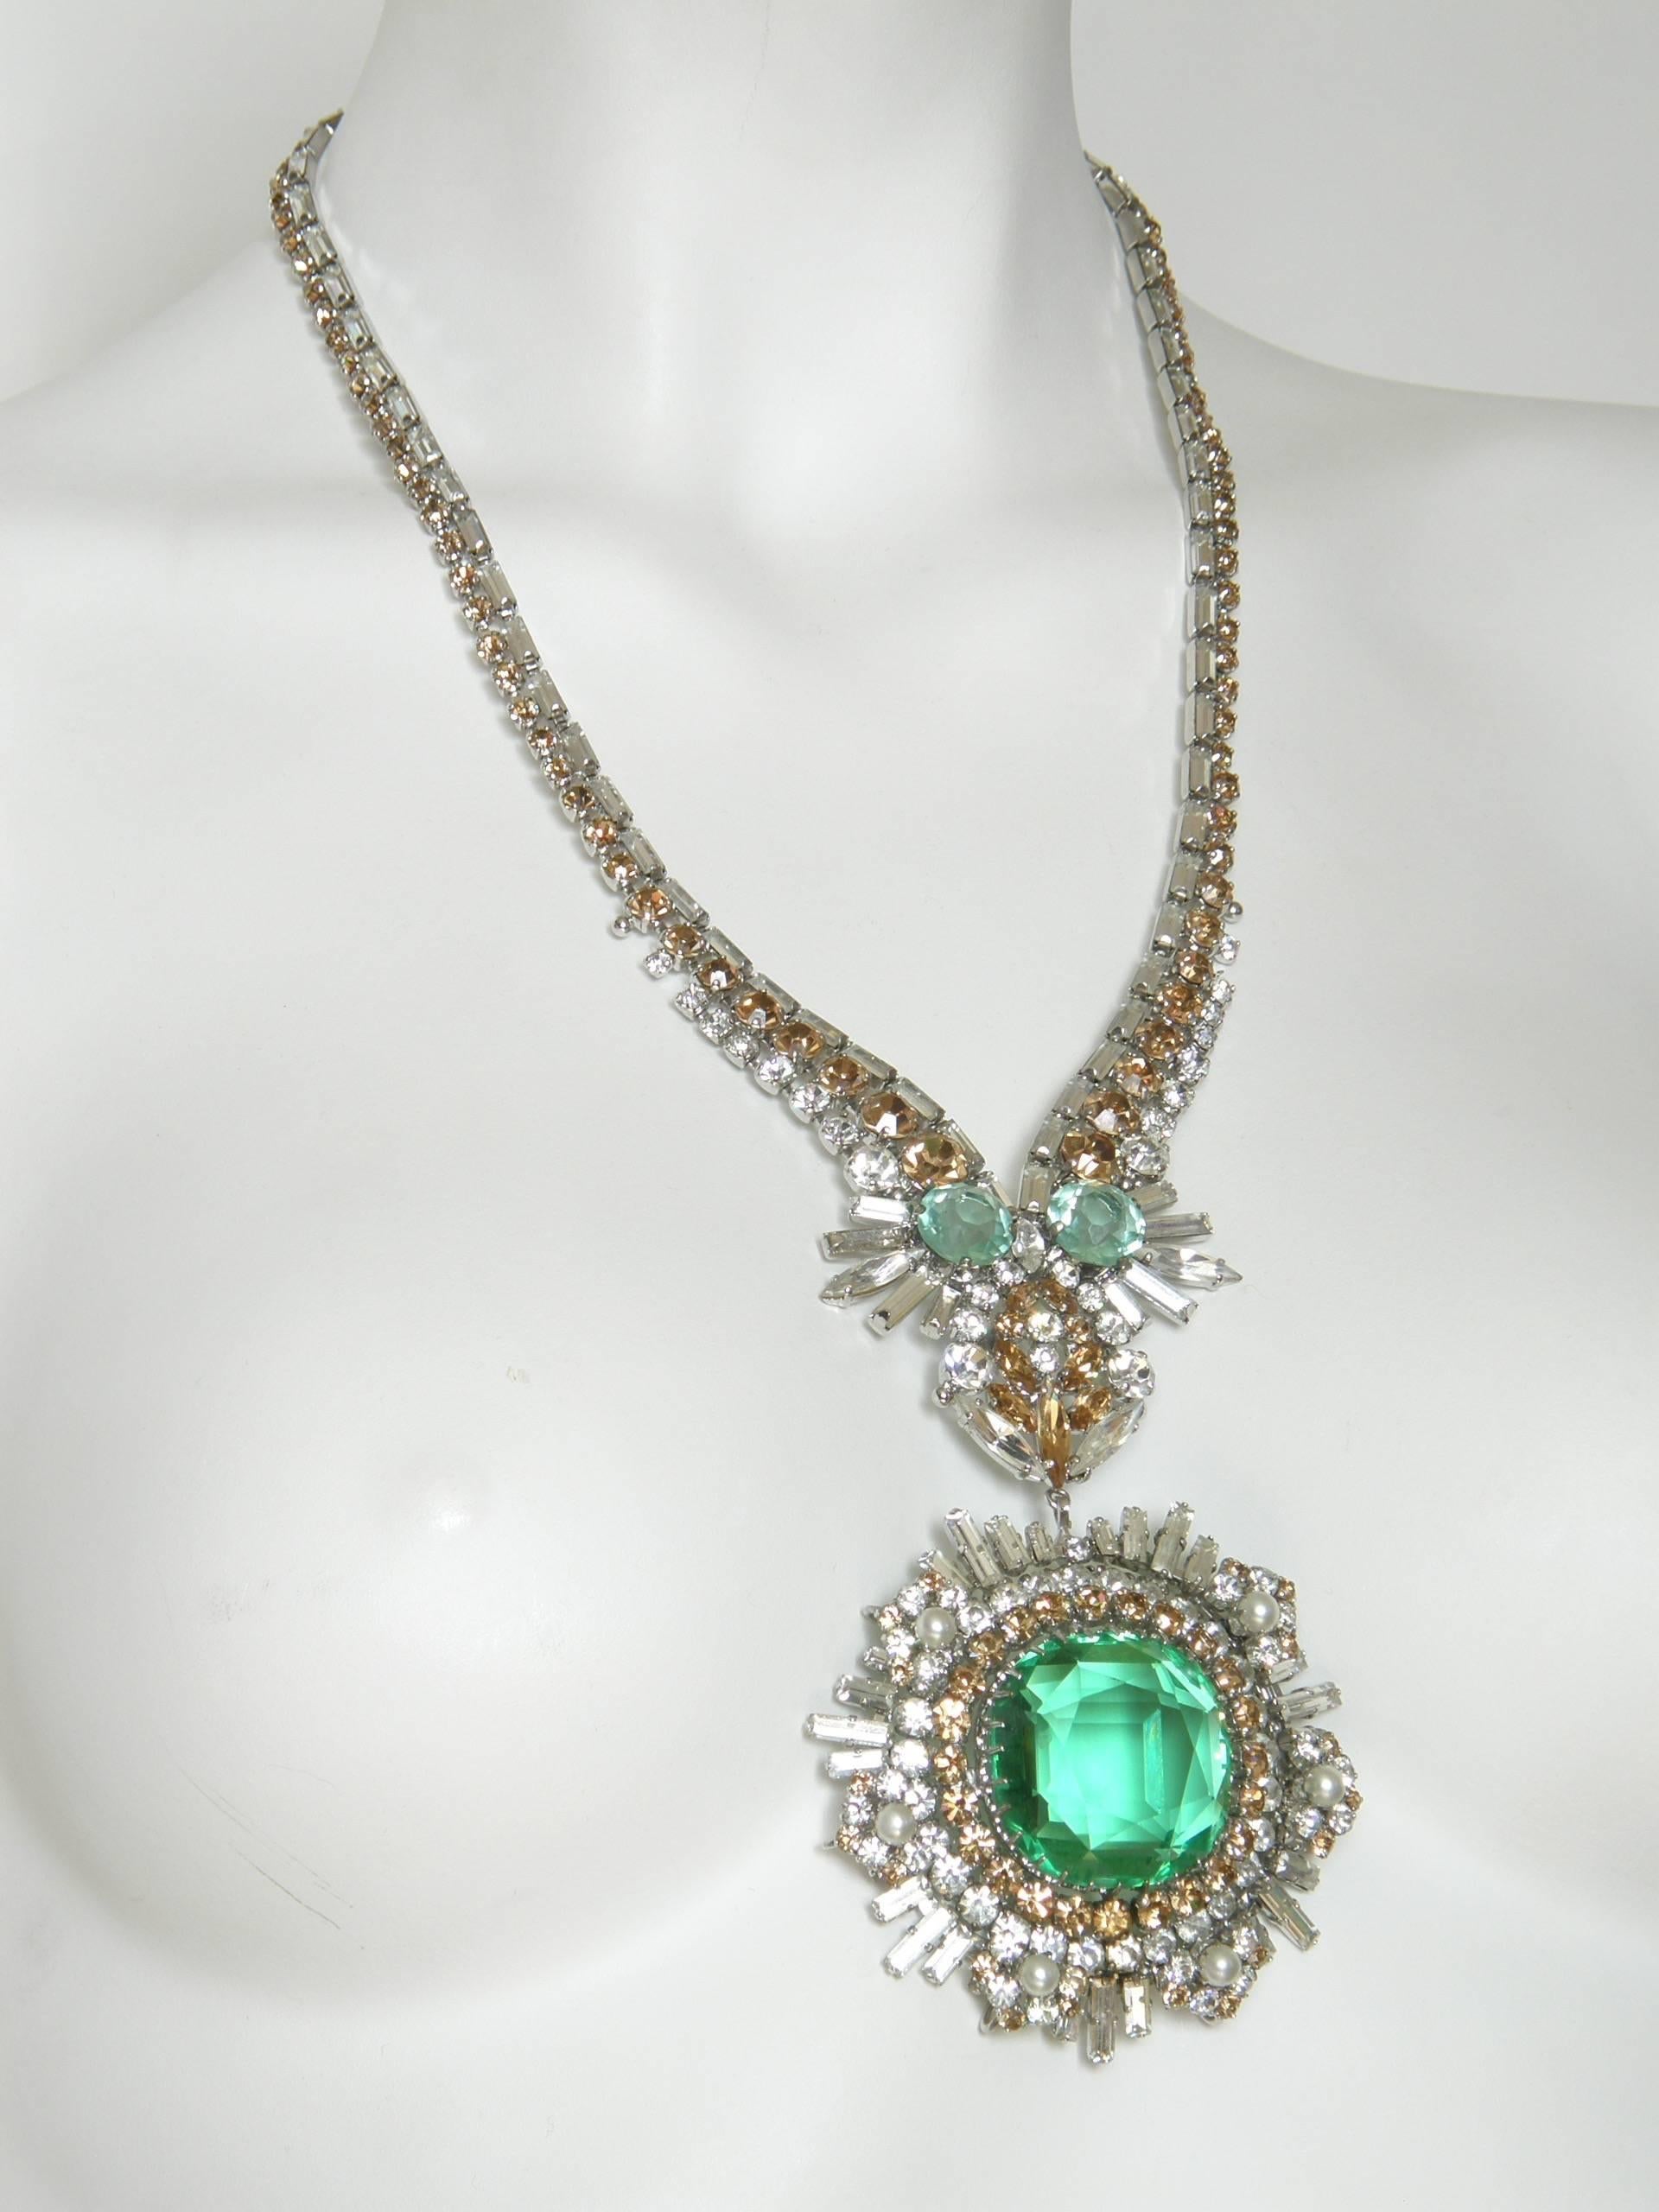 Modernist West German Rhinestone Necklace with Faux Emeralds Diamonds and Citrines